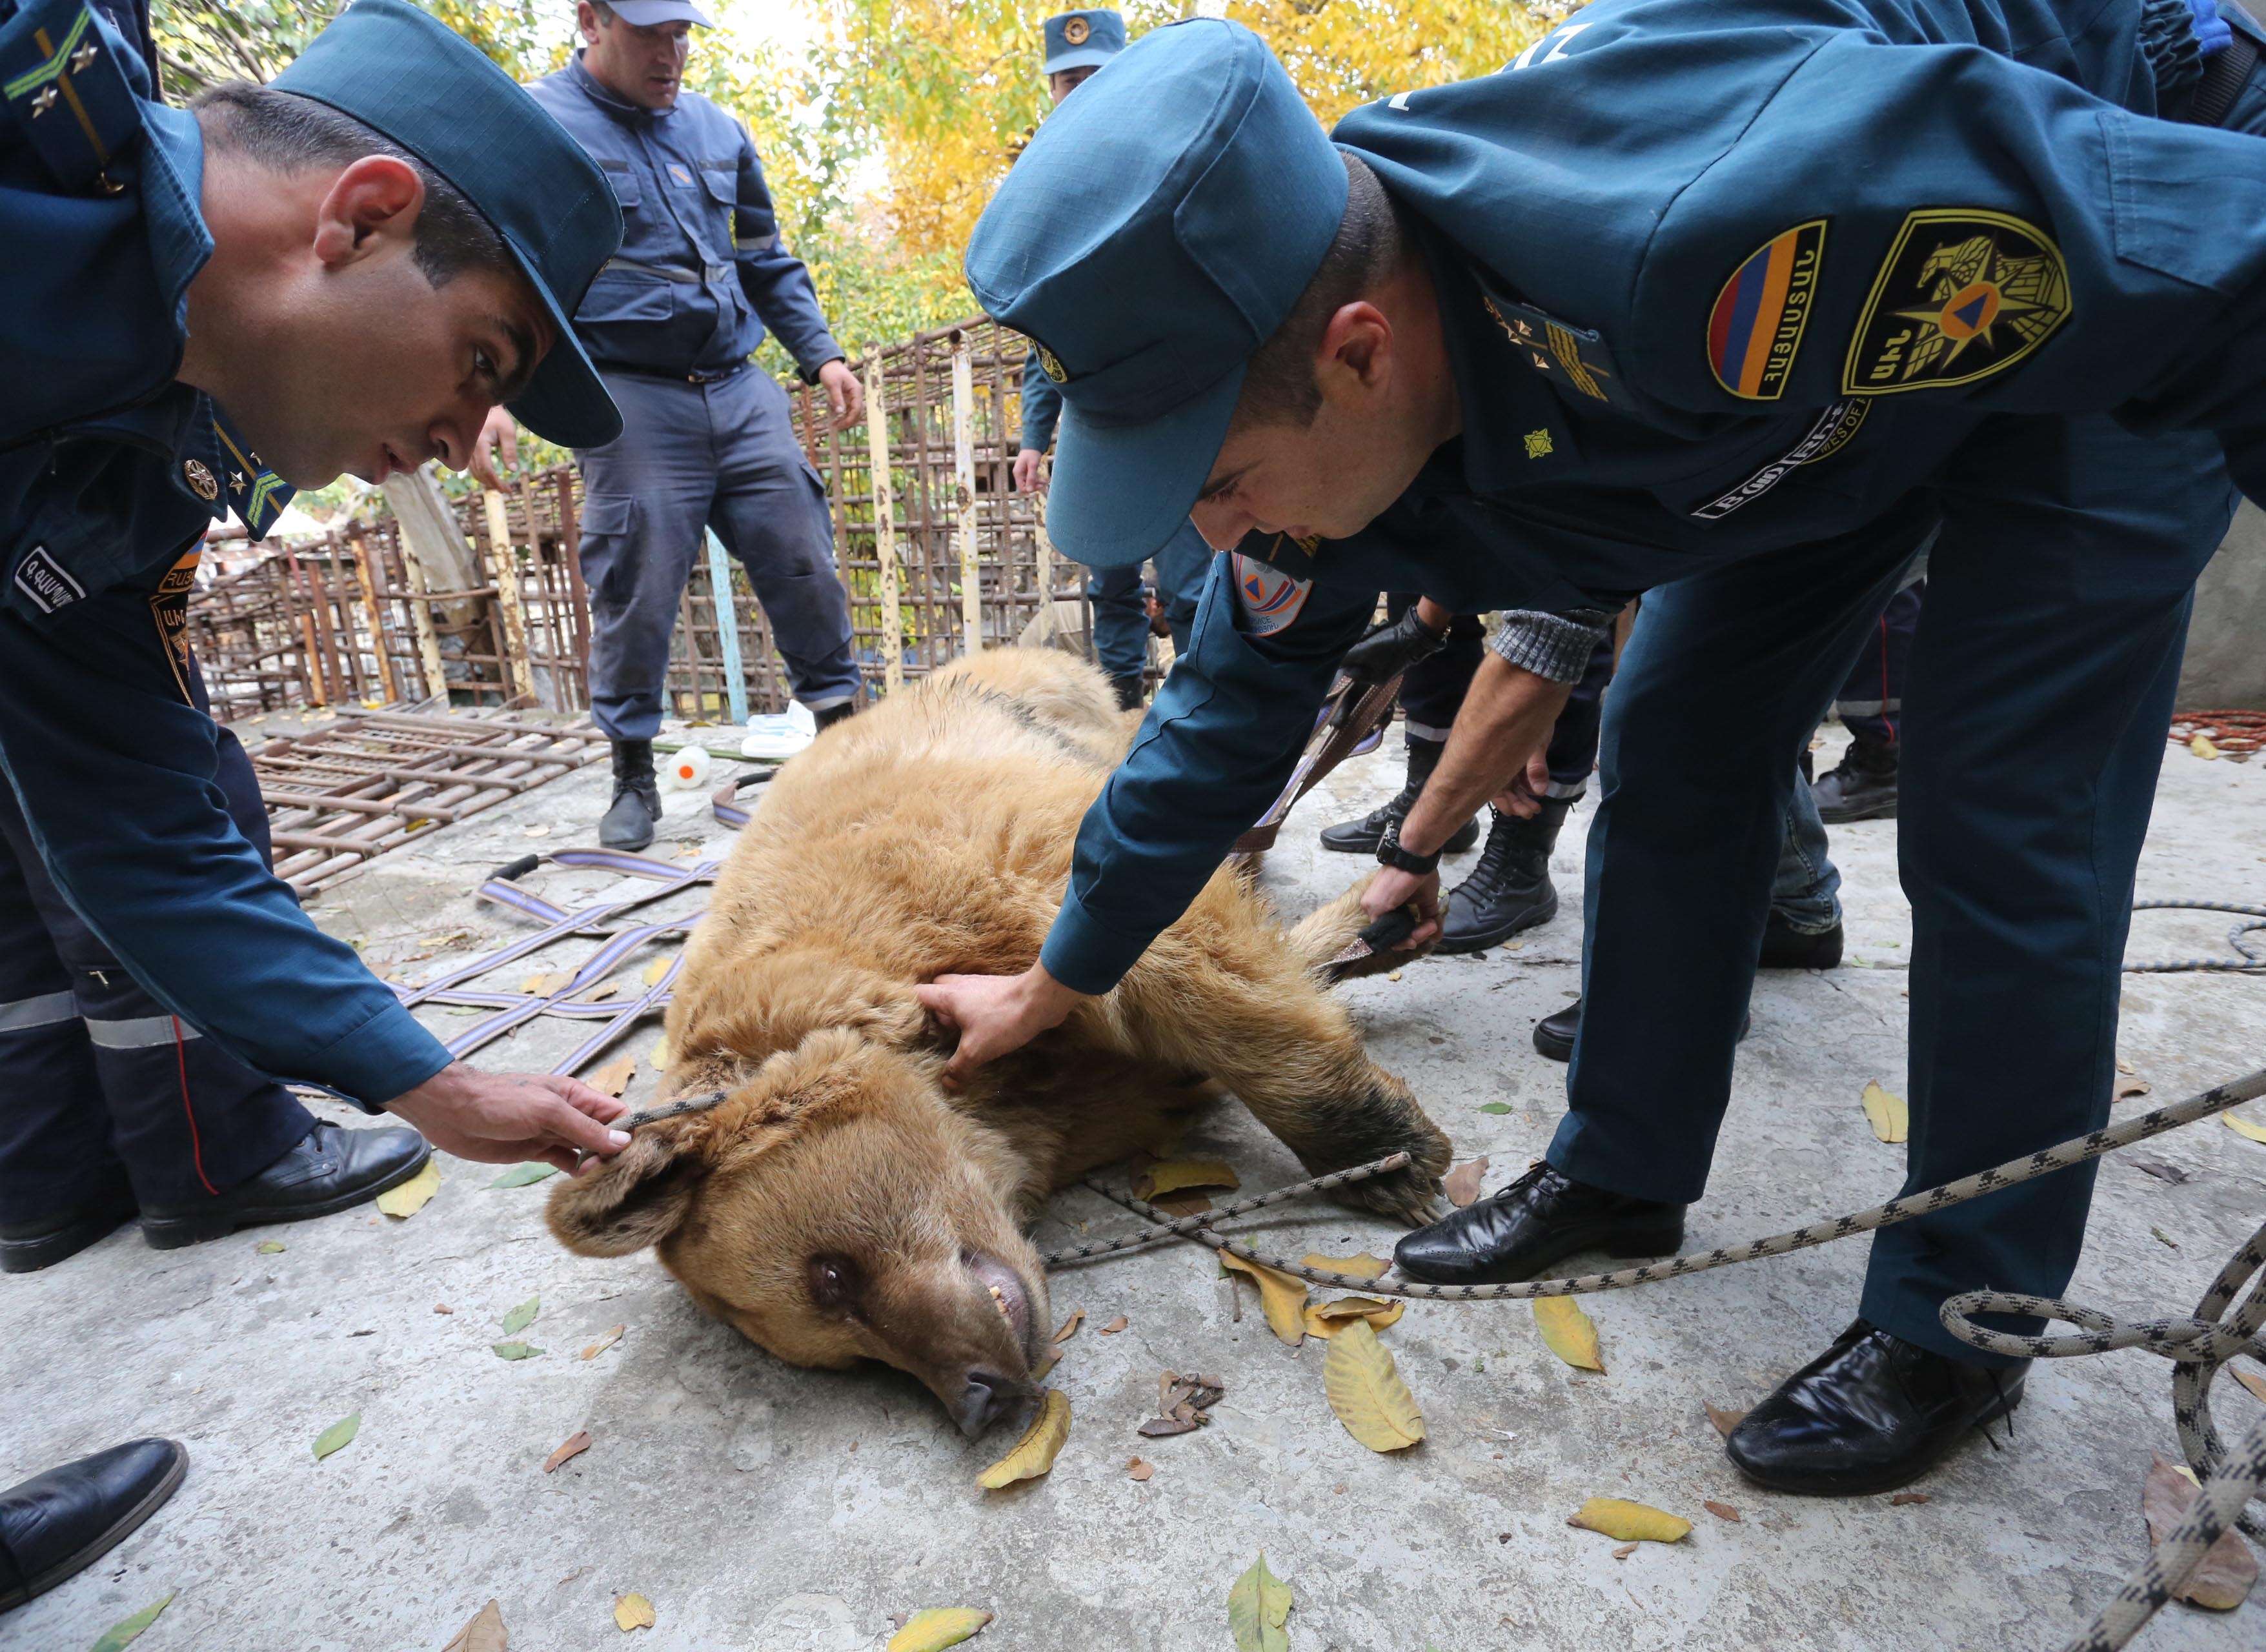 Rescuers hauling a brown bear out of his enclosure